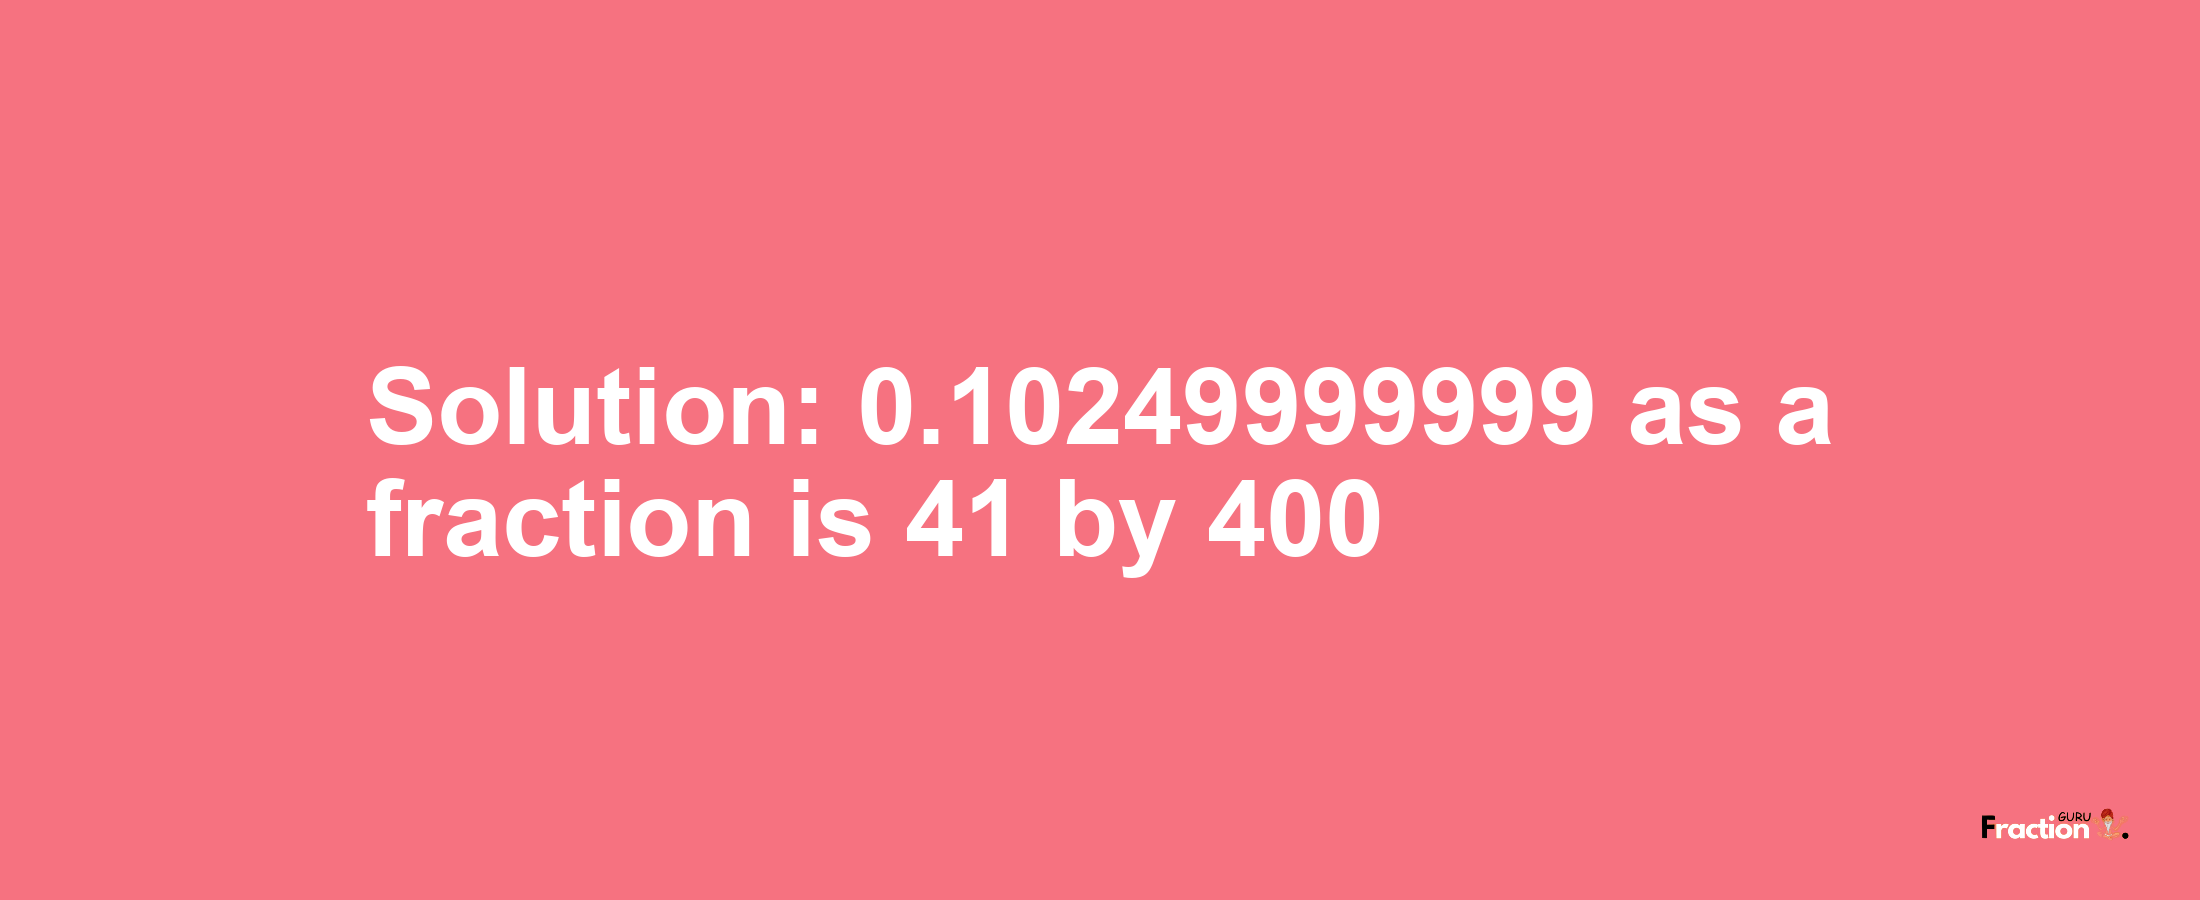 Solution:0.10249999999 as a fraction is 41/400